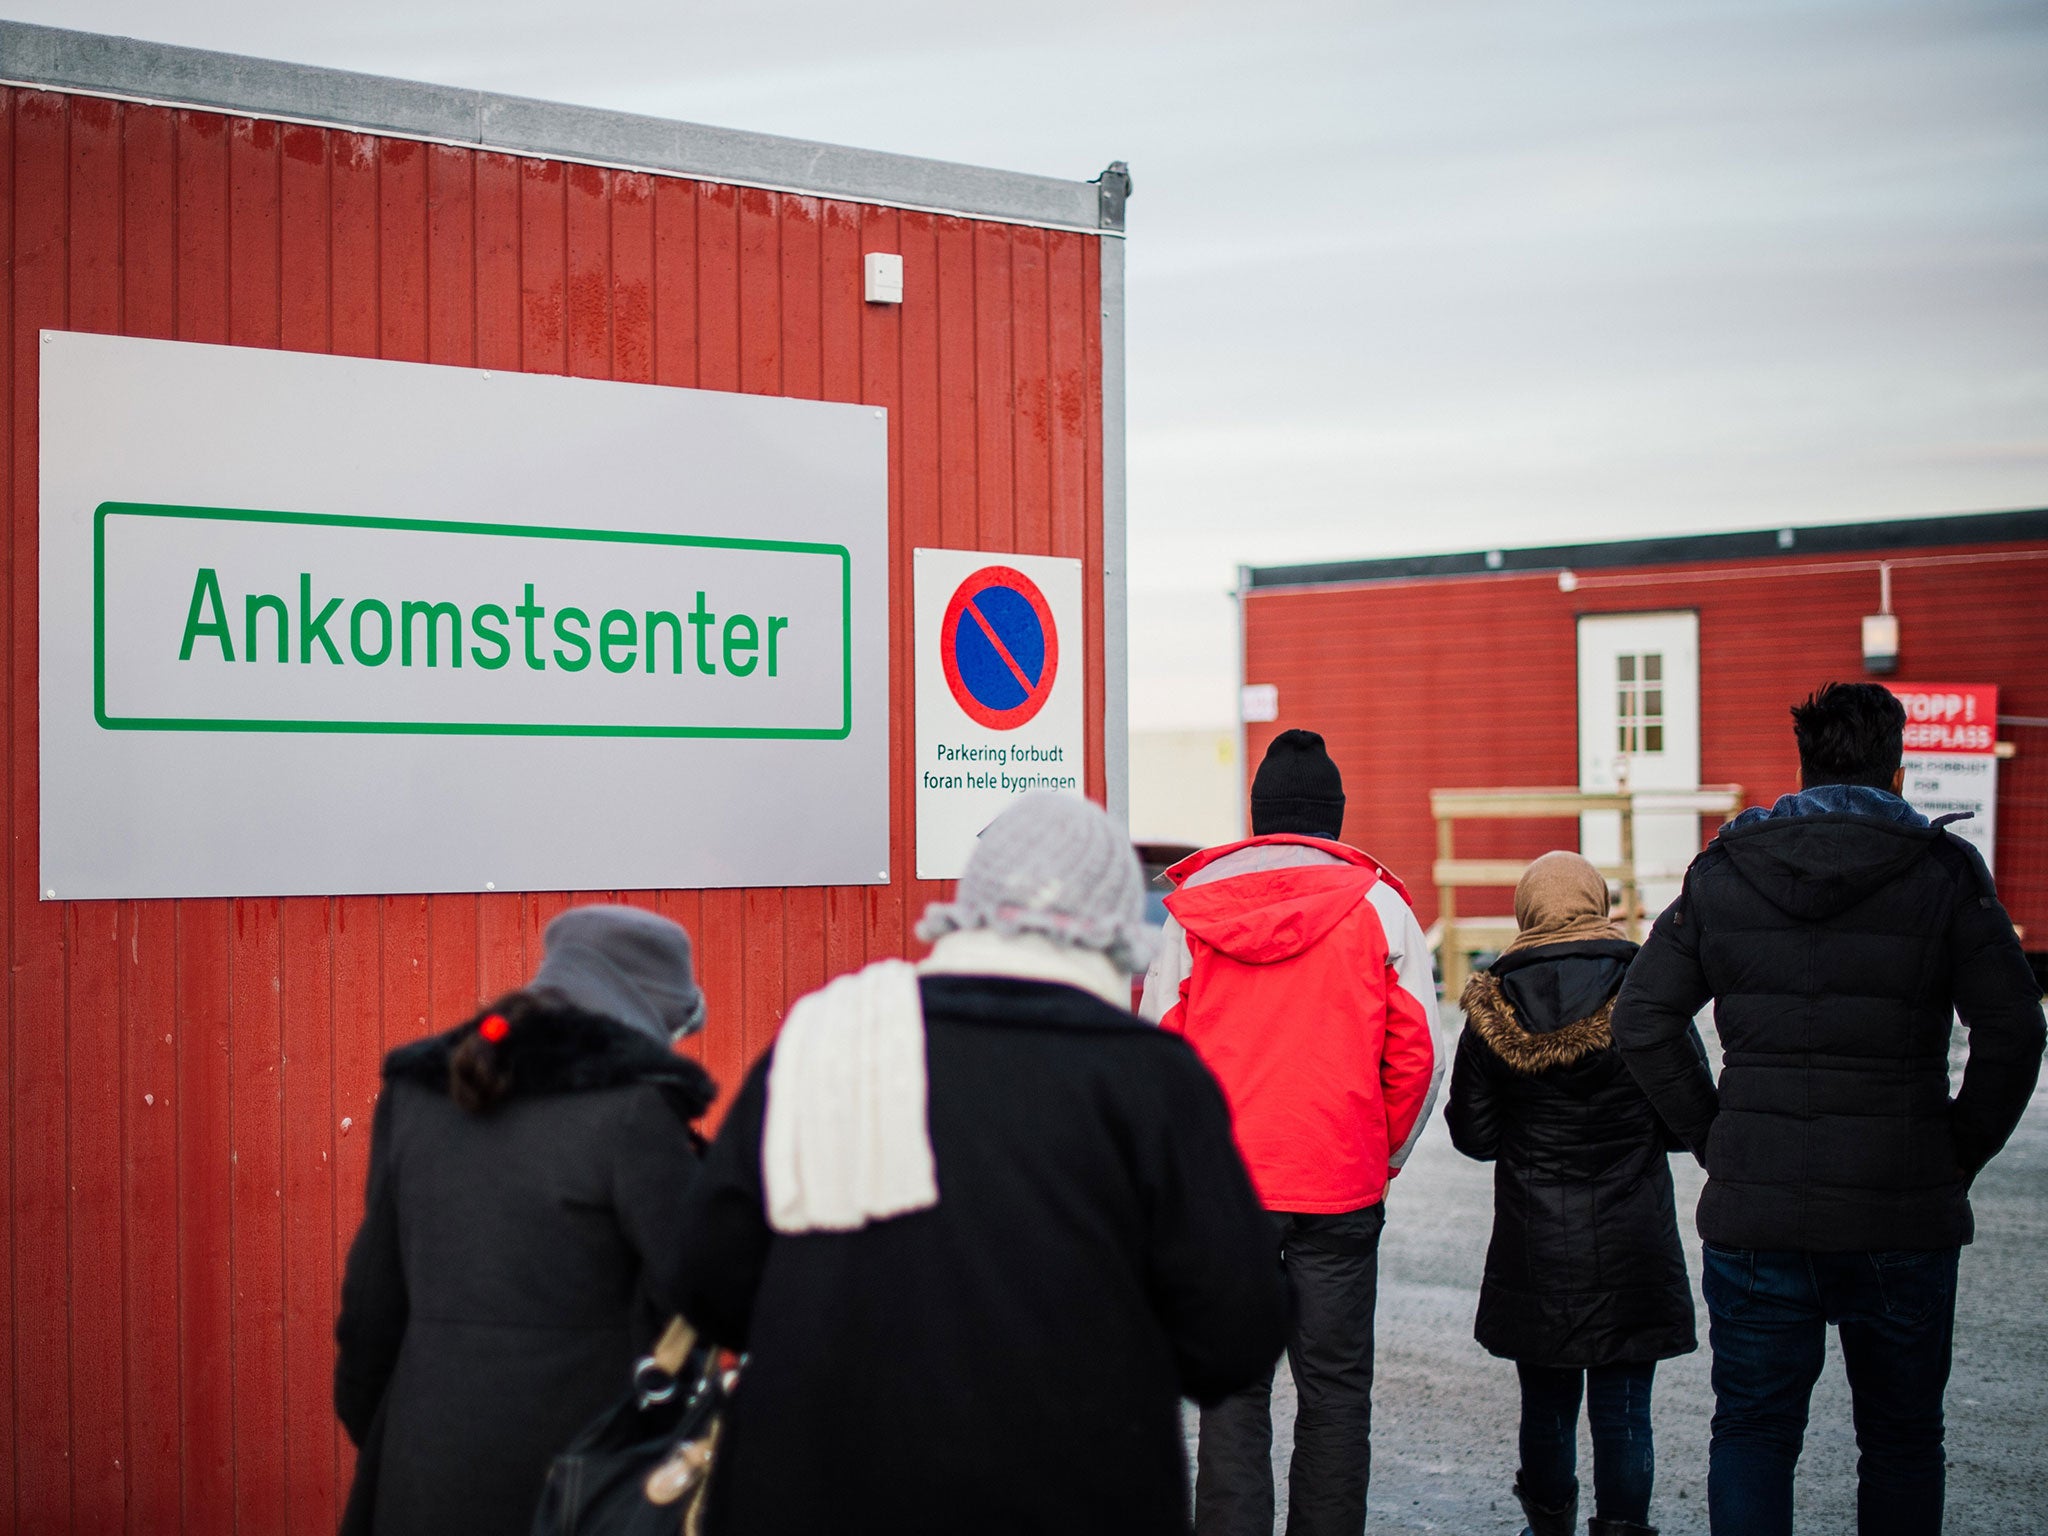 Refugees enter the arrival centre for refugees near the town on Kirkenes, northern Norway, close to the Russian - Norwegian border on November 12, 2015.